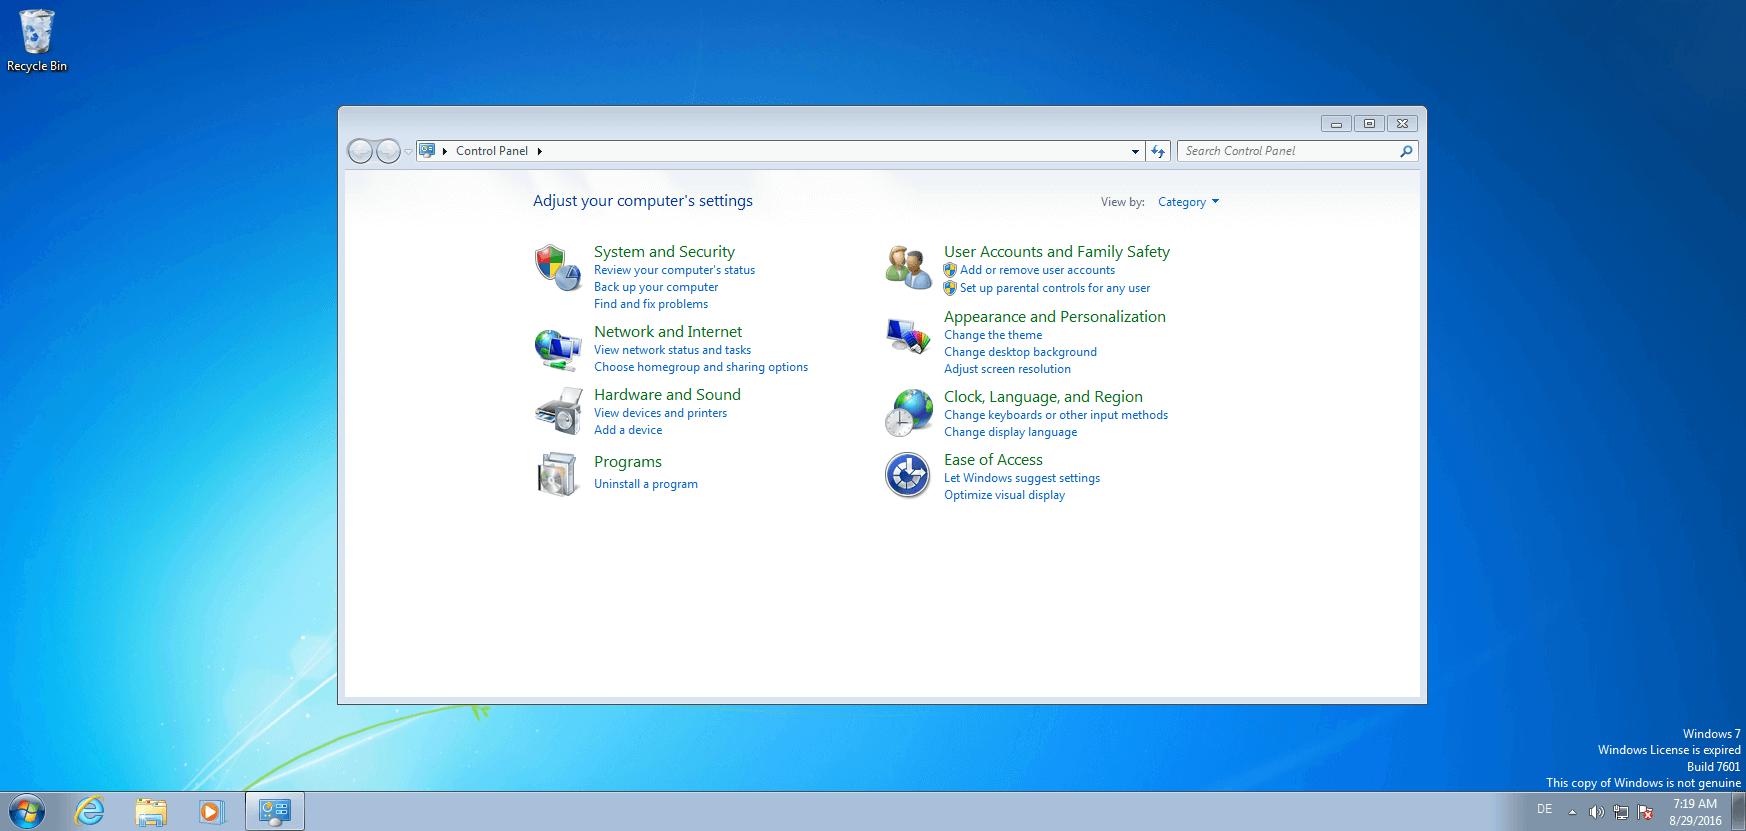 The Windows system settings